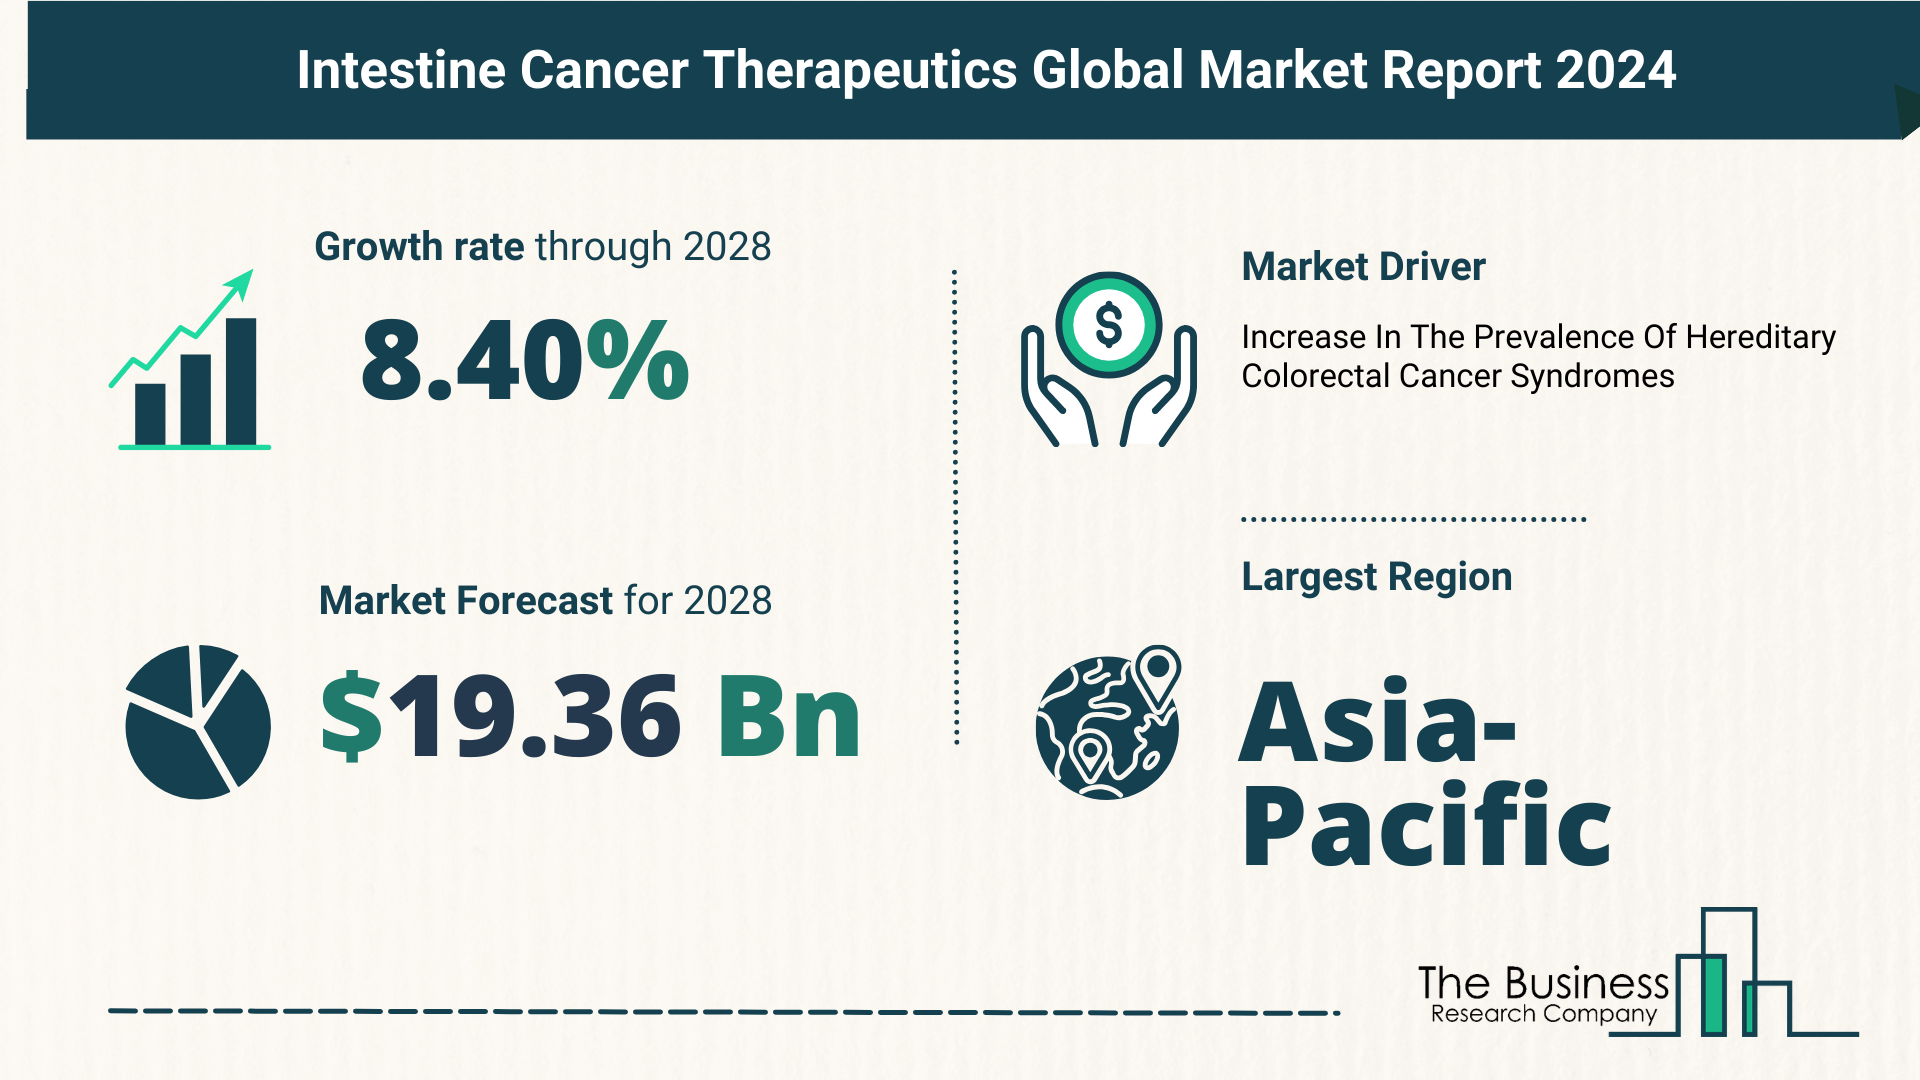 Top 5 Insights From The Intestine Cancer Therapeutics Market Report 2024